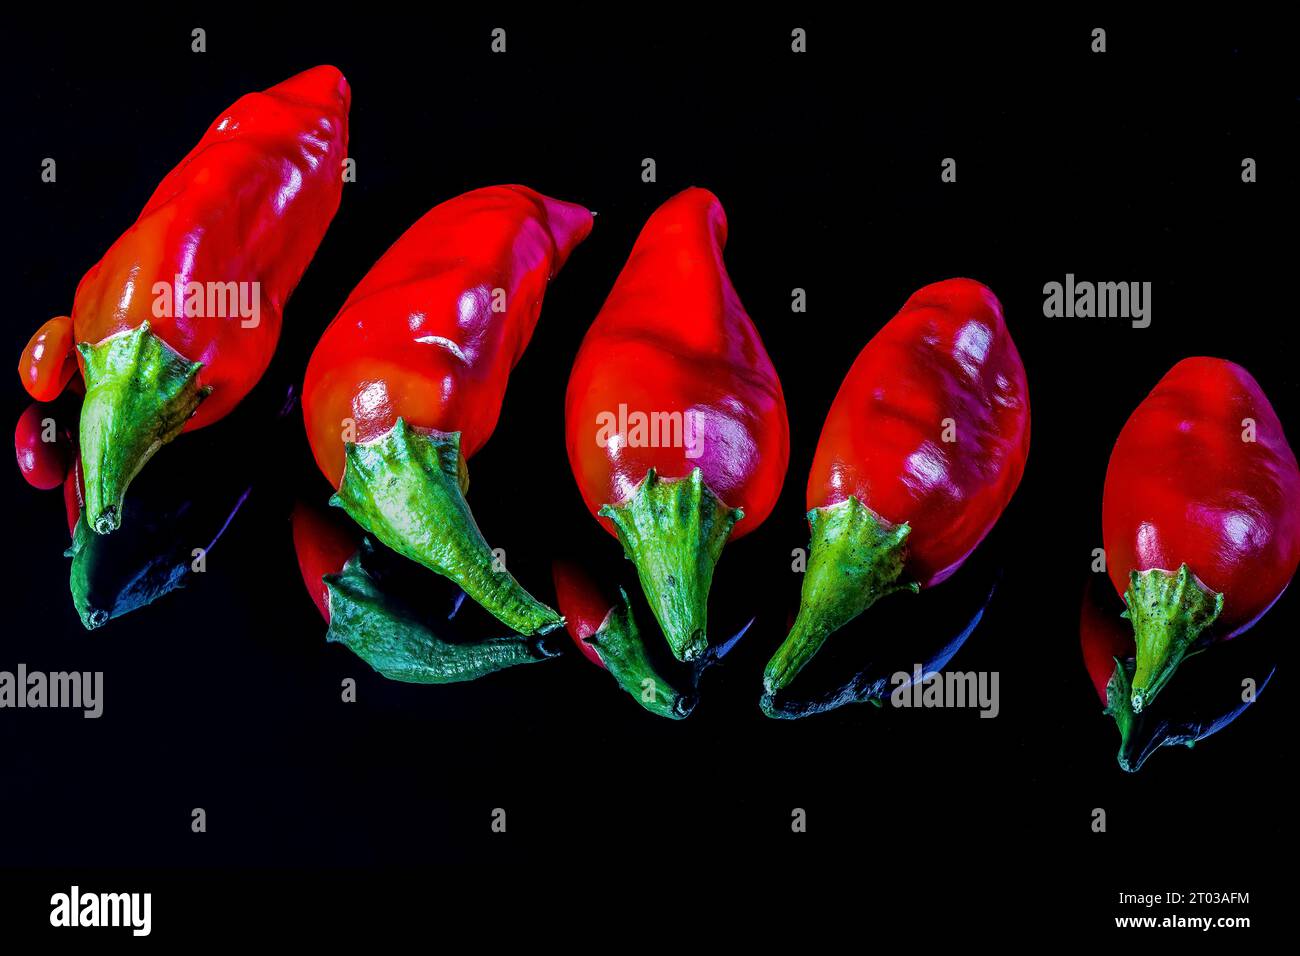 Five ripe red chili peppers isolated on a black reflecting background Stock Photo